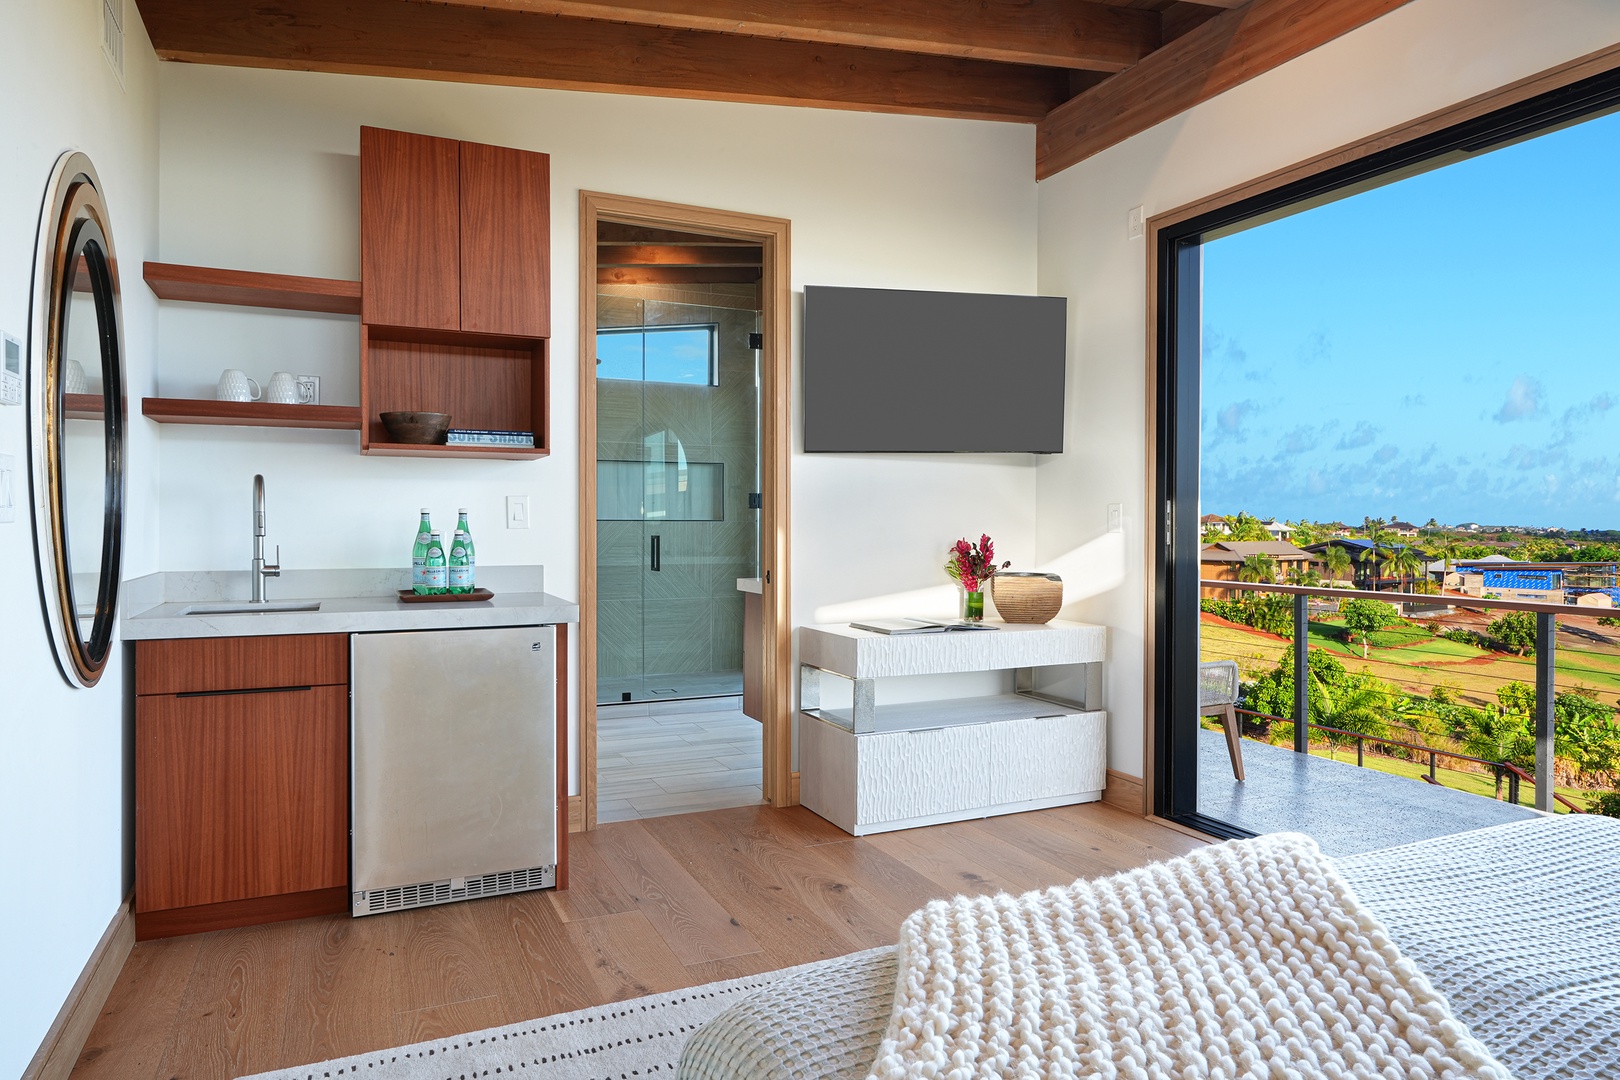 Koloa Vacation Rentals, Hale Keaka at Kukui'ula - Enjoy the seamless blend of indoor comfort and outdoor beauty in the well-appointed Ohana guest bedroom upstairs, complete with a mini-bar.